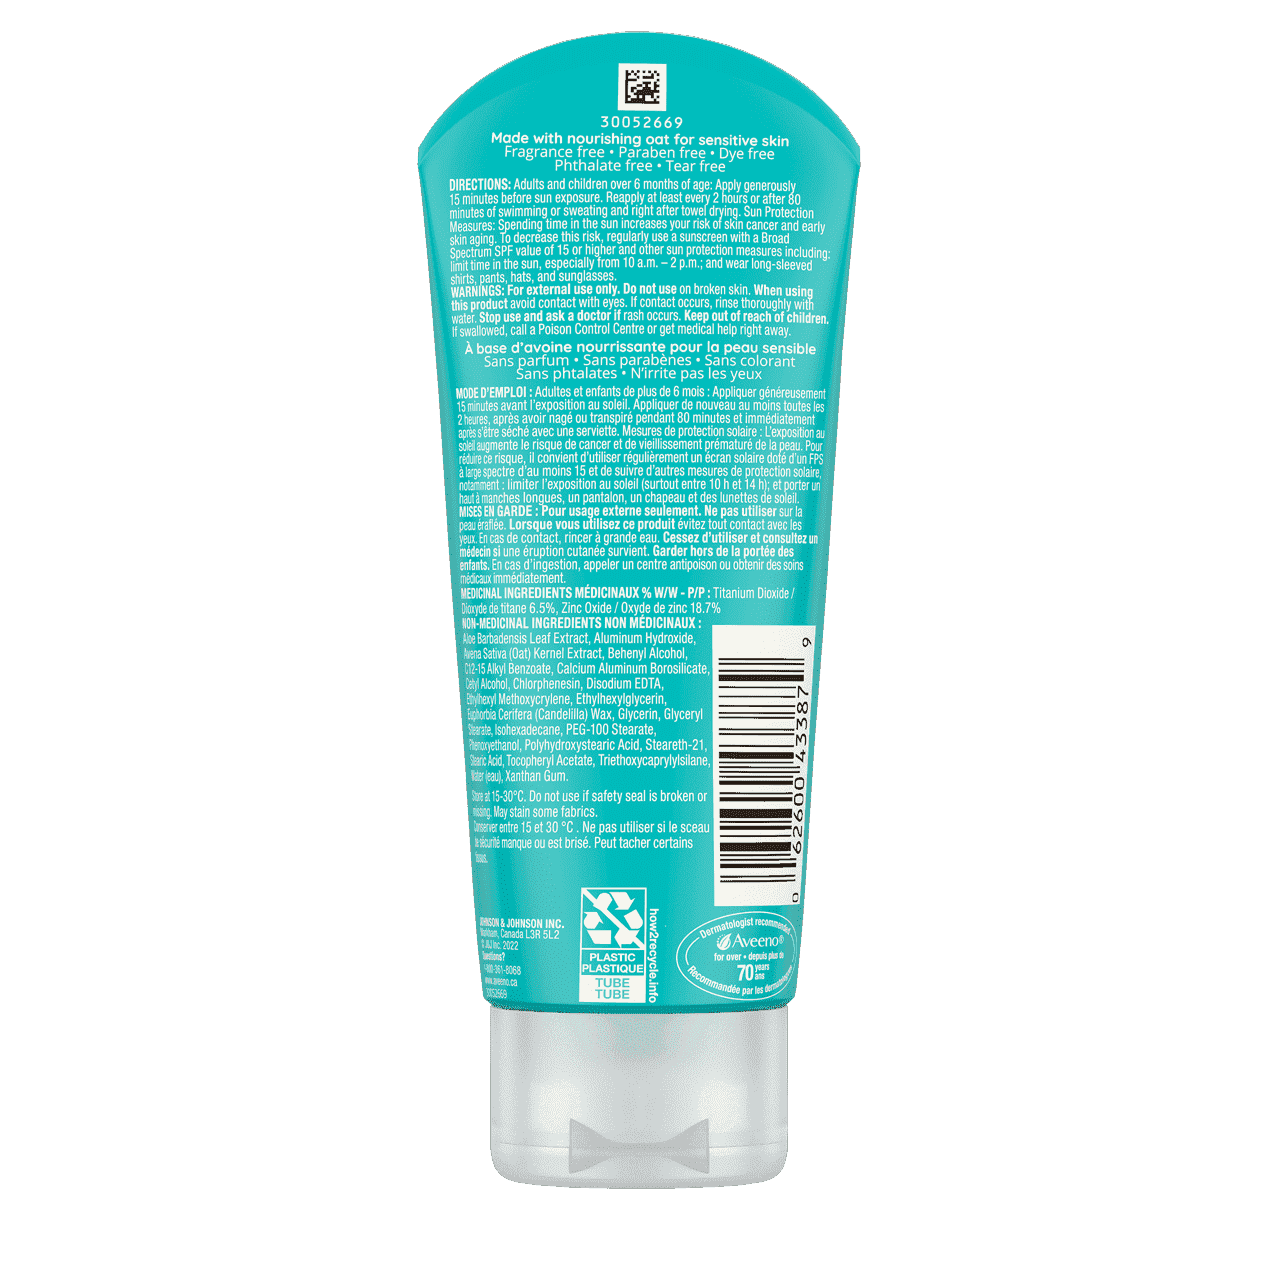 AVEENO® Protect + Soothe Mineral Sunscreen with SPF 30 for Sensitive Skin tube back label